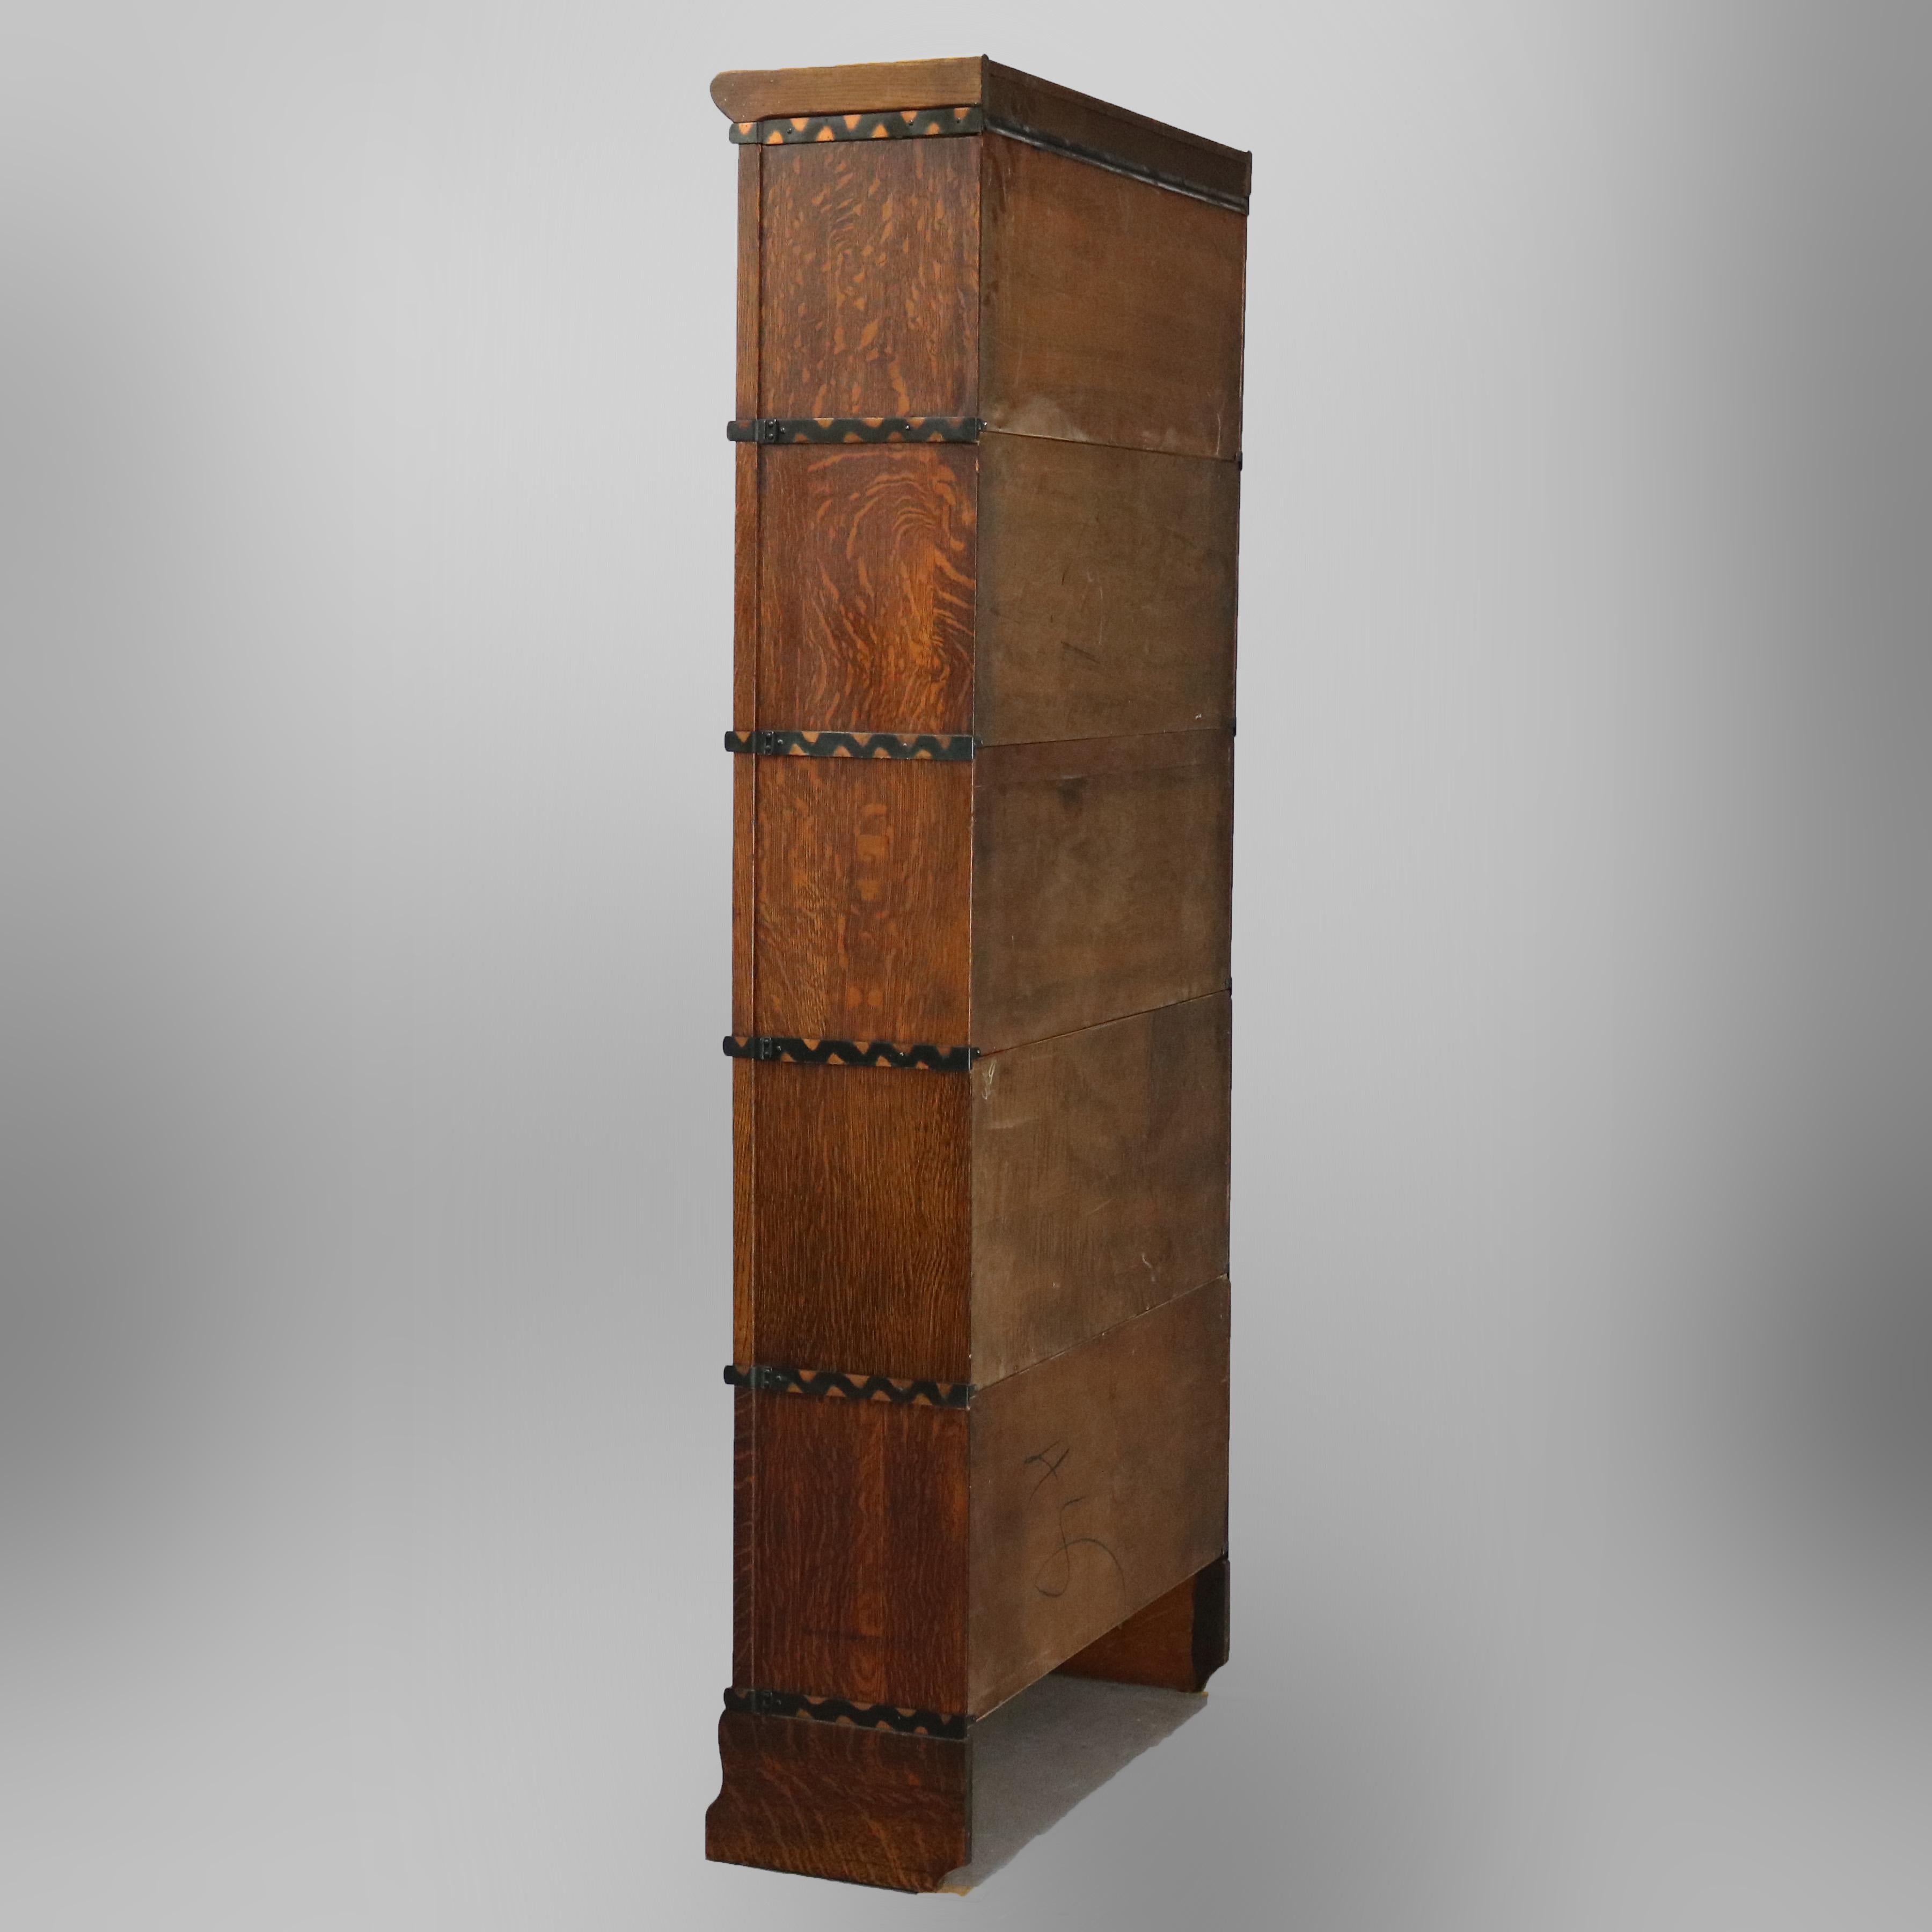 An antique Arts & Crafts Mission Barrister stacking bookcase by Macey offers quarter sawn oak construction with five sections having pull-out glass doors, original labels as photographed, circa 1910.

Measures: 77.25